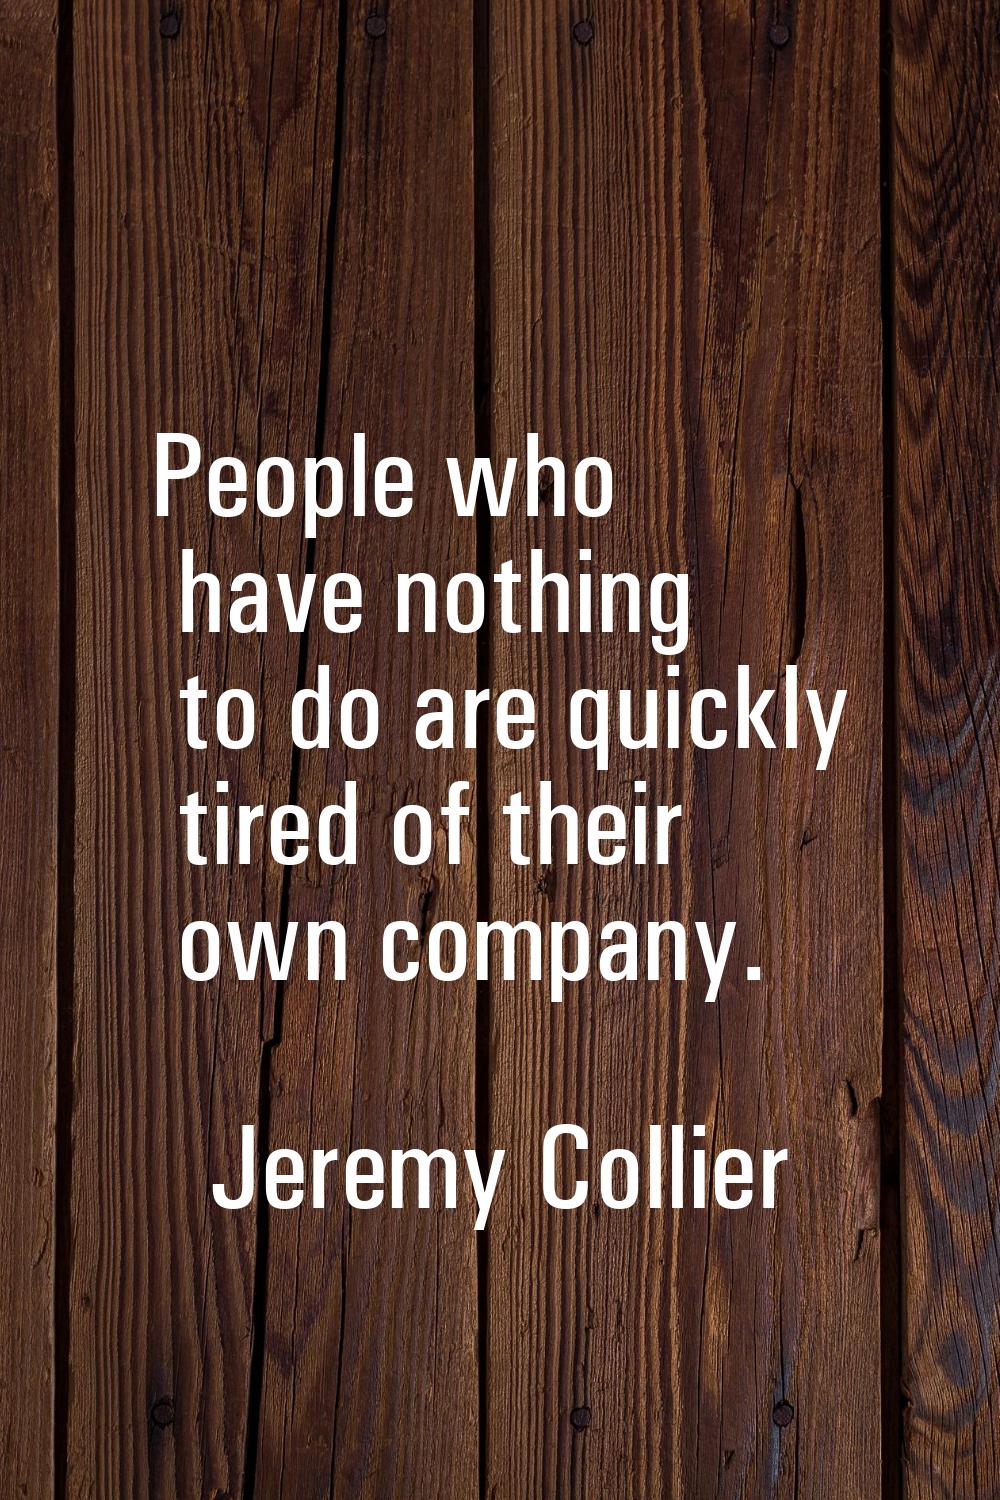 People who have nothing to do are quickly tired of their own company.